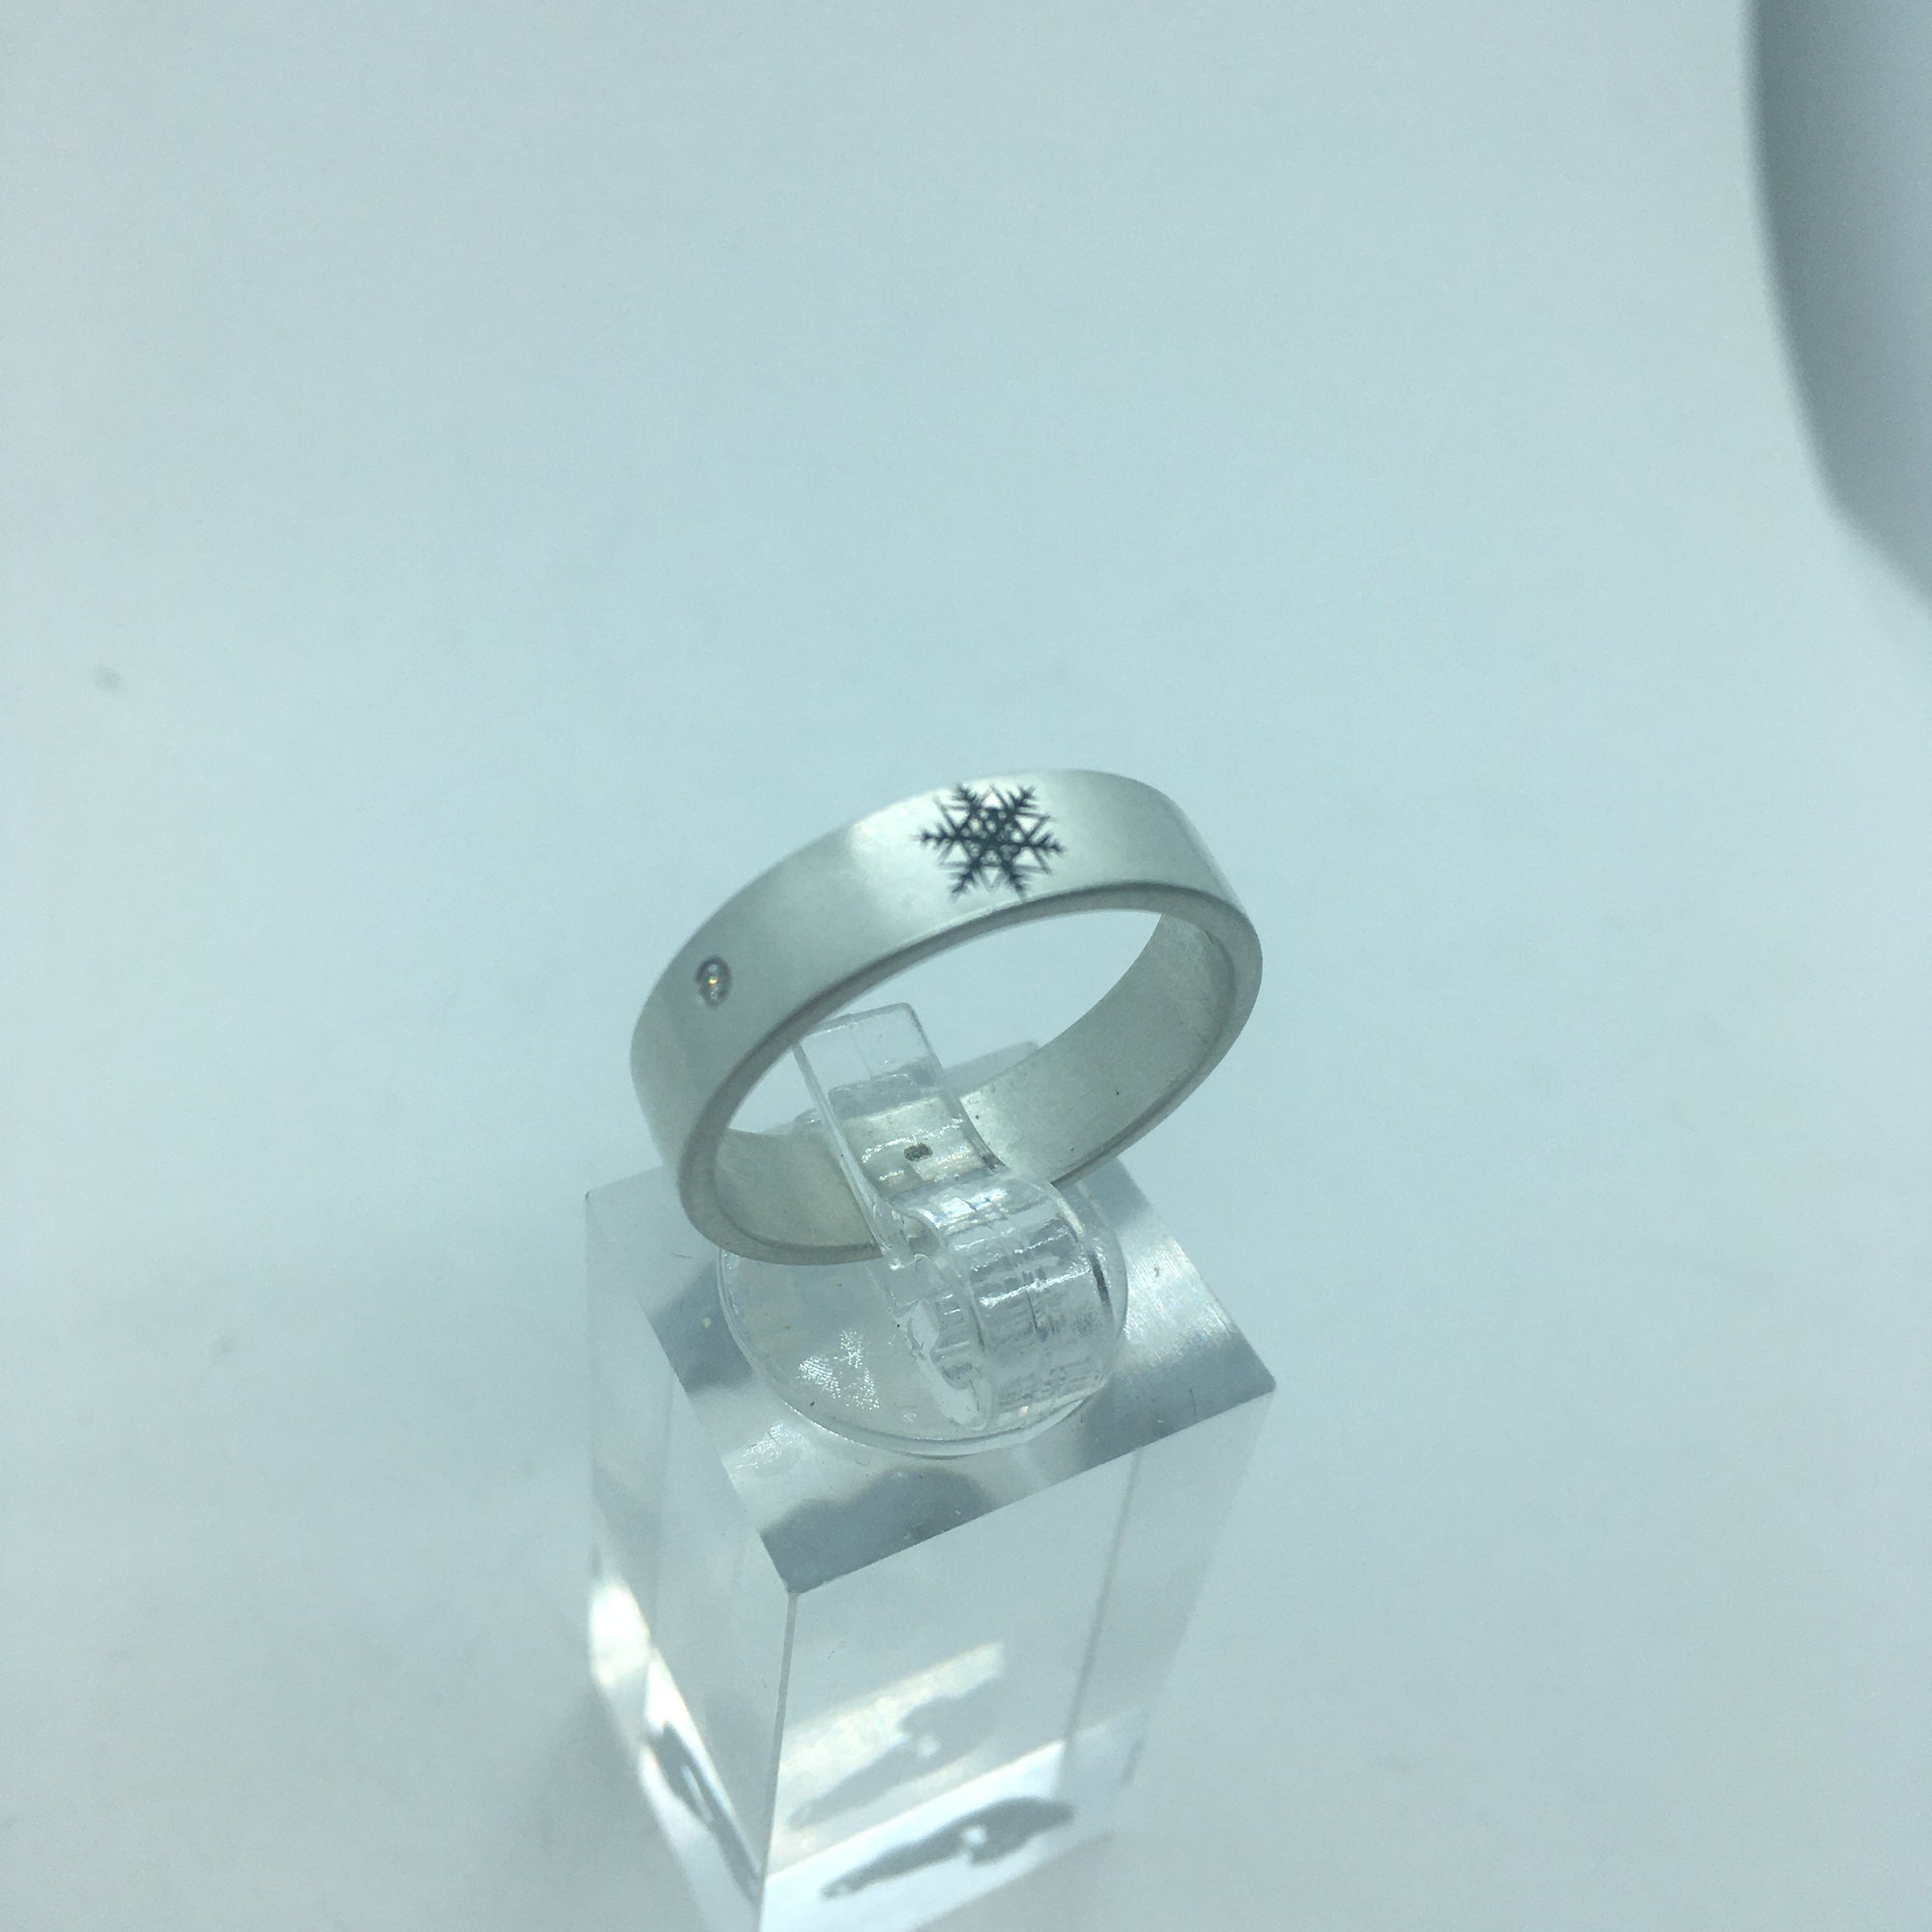 Silver Snowflake Ring with Diamonds